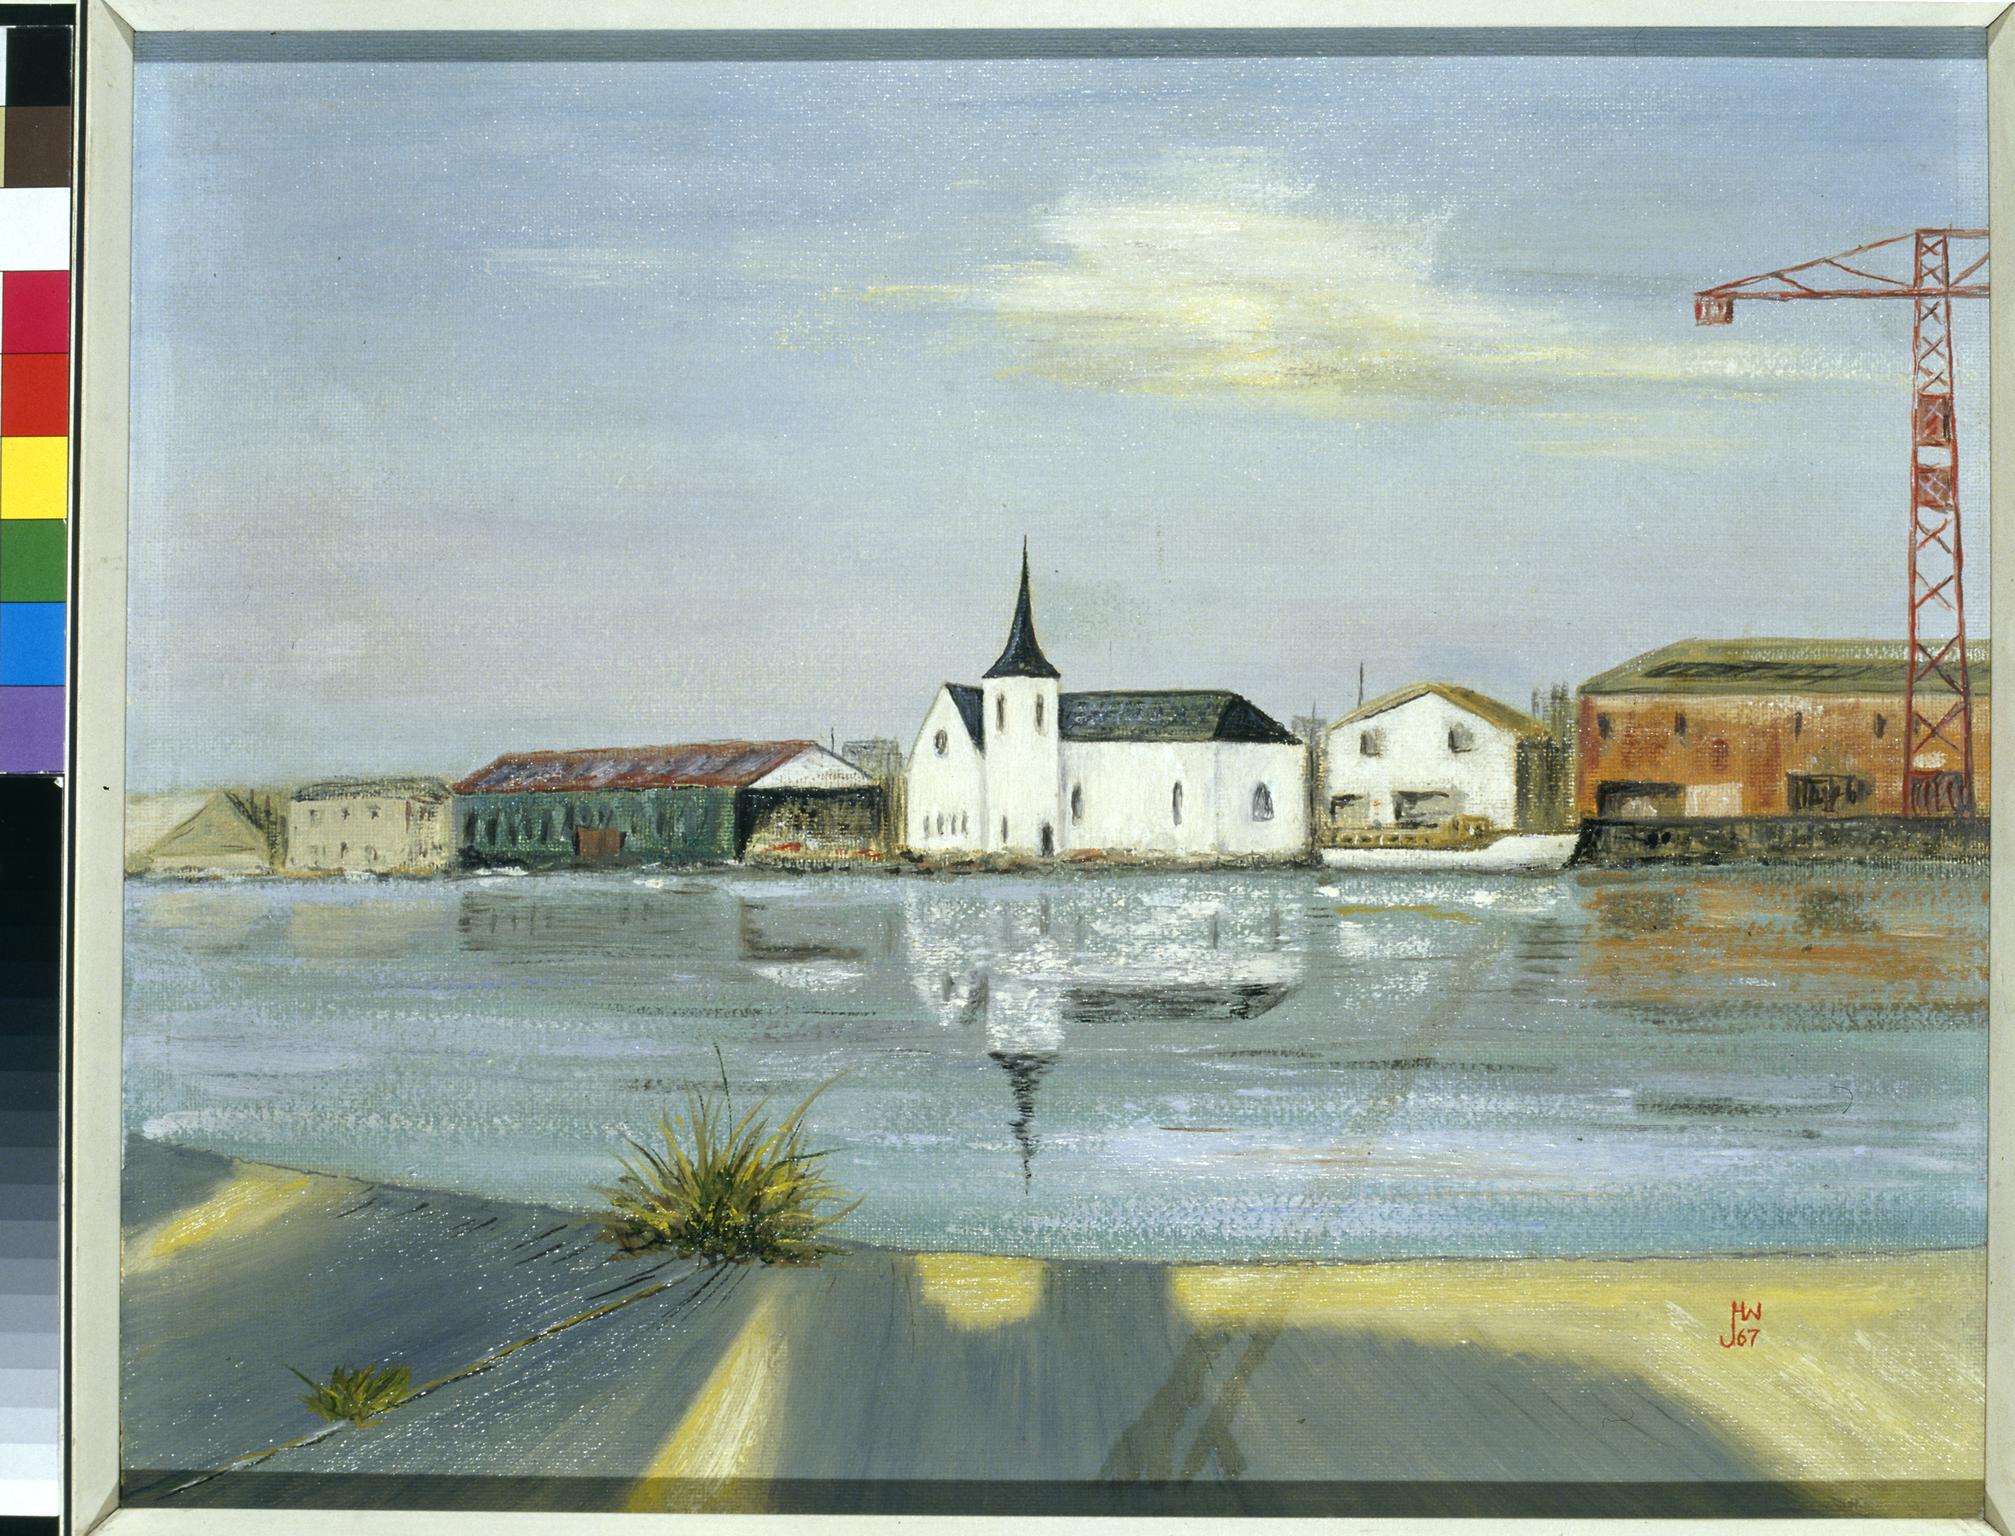 Bute West Dock, Cardiff (painting)